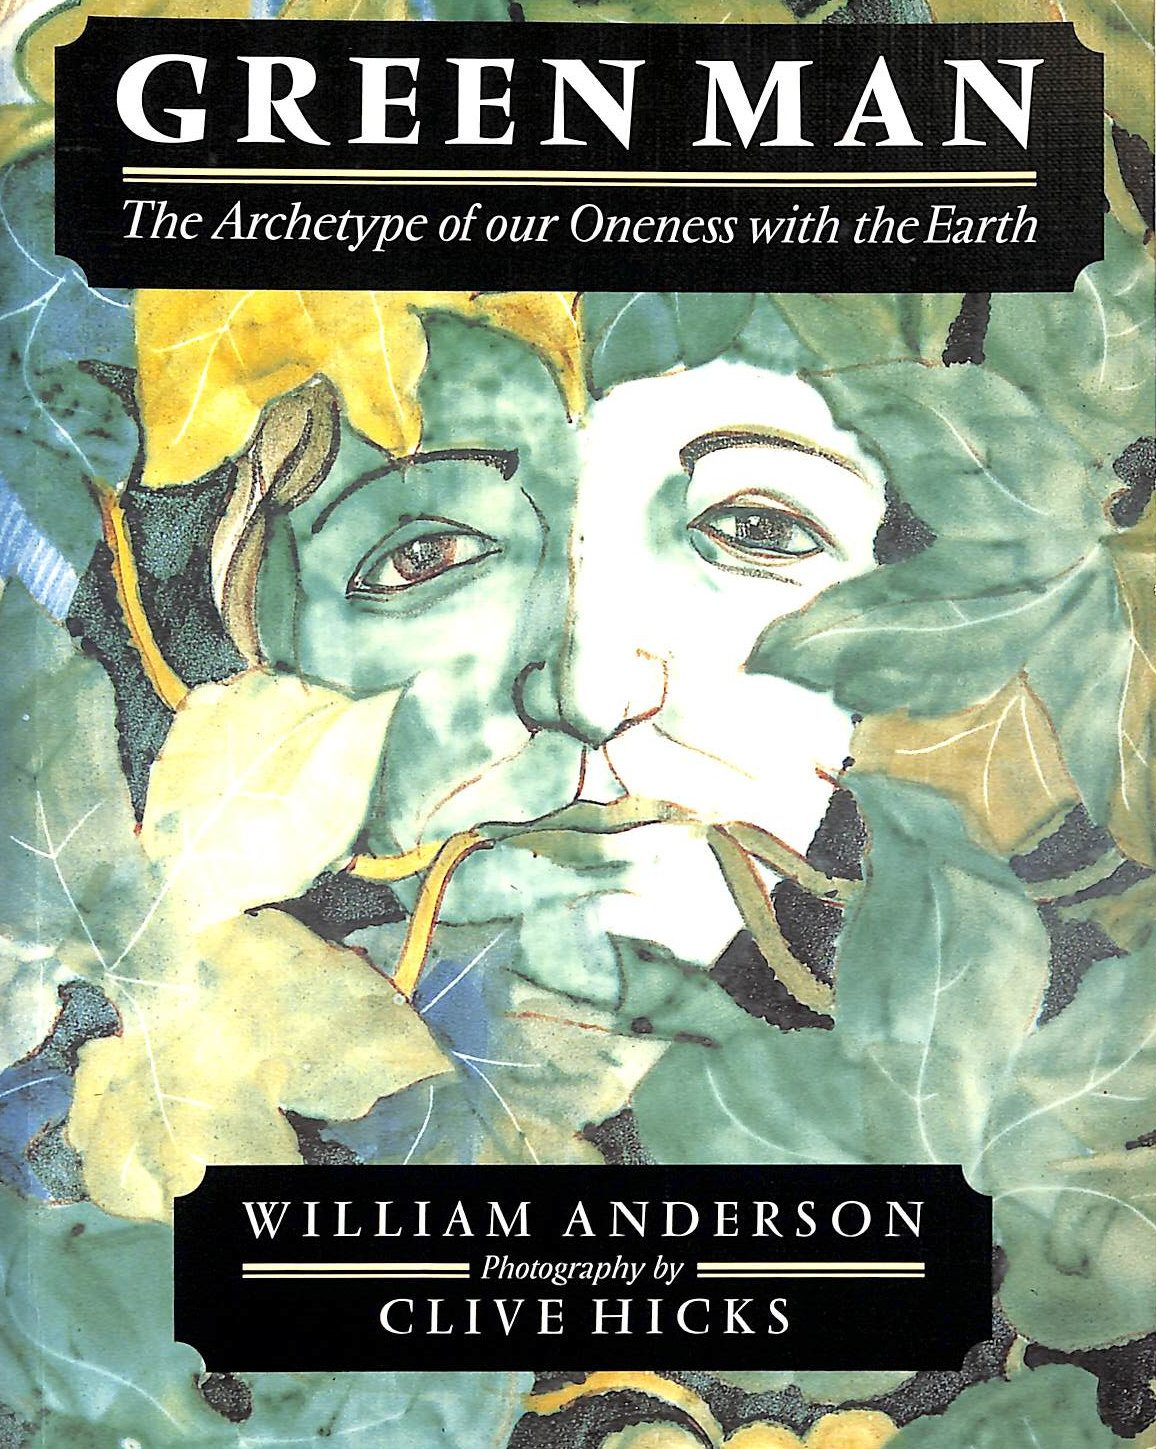 ANDERSON, WILLIAM; HICKS, CLIVE [ILLUSTRATOR] - Green Man: The Archetype of Our Oneness with the Earth